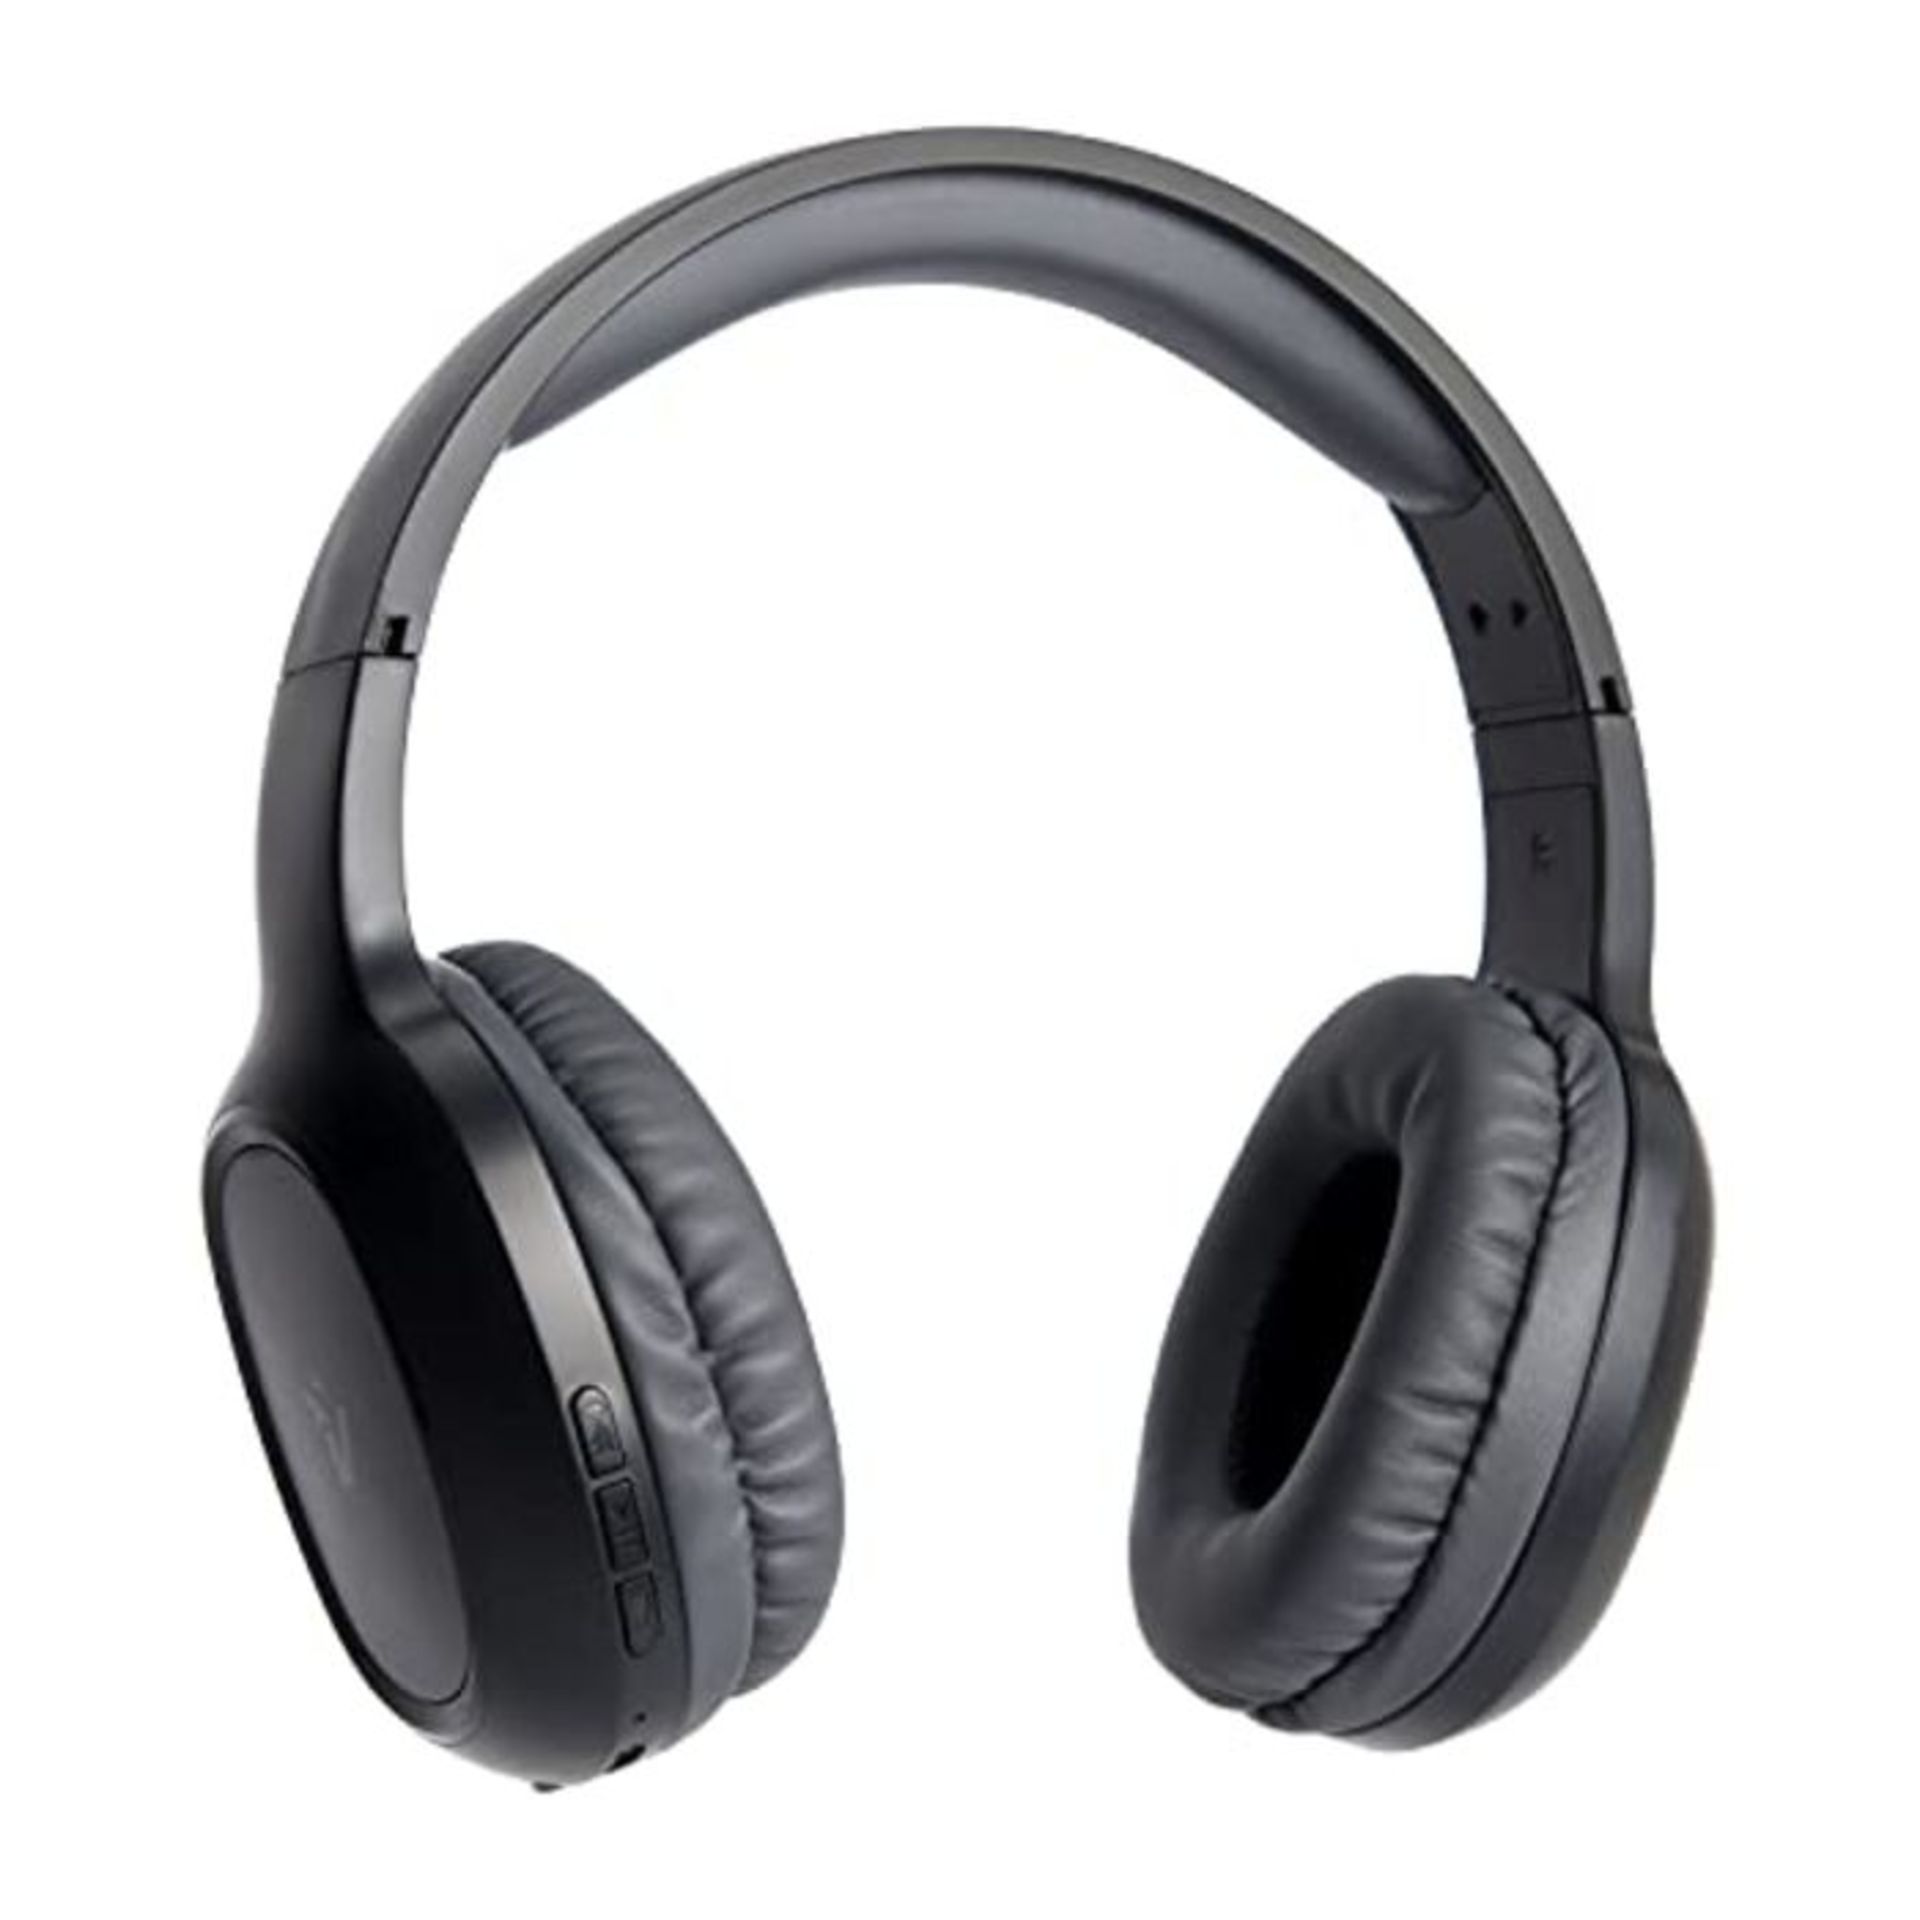 Vultech Bluetooth 5.0 HBT-10BK Headphones with Microphone and Track Control - Black